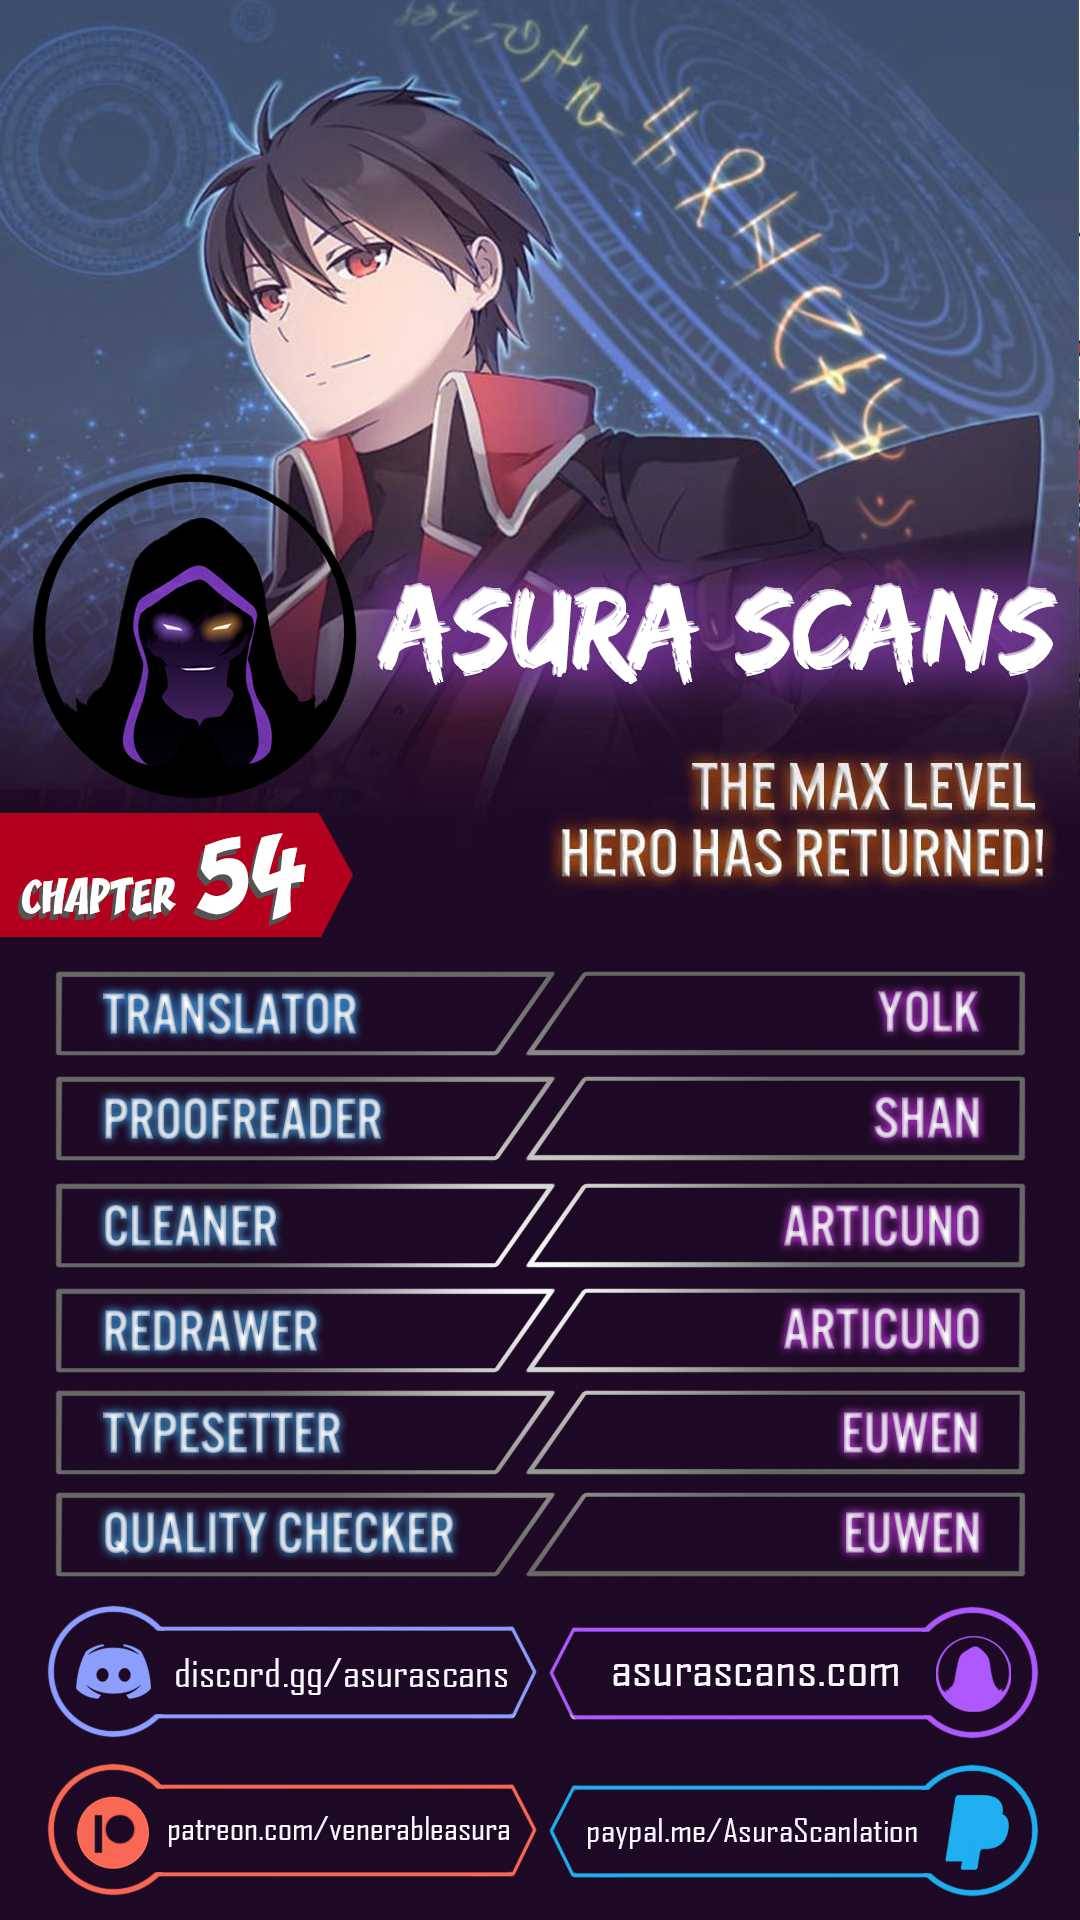 The MAX leveled hero will return! Chapter 54